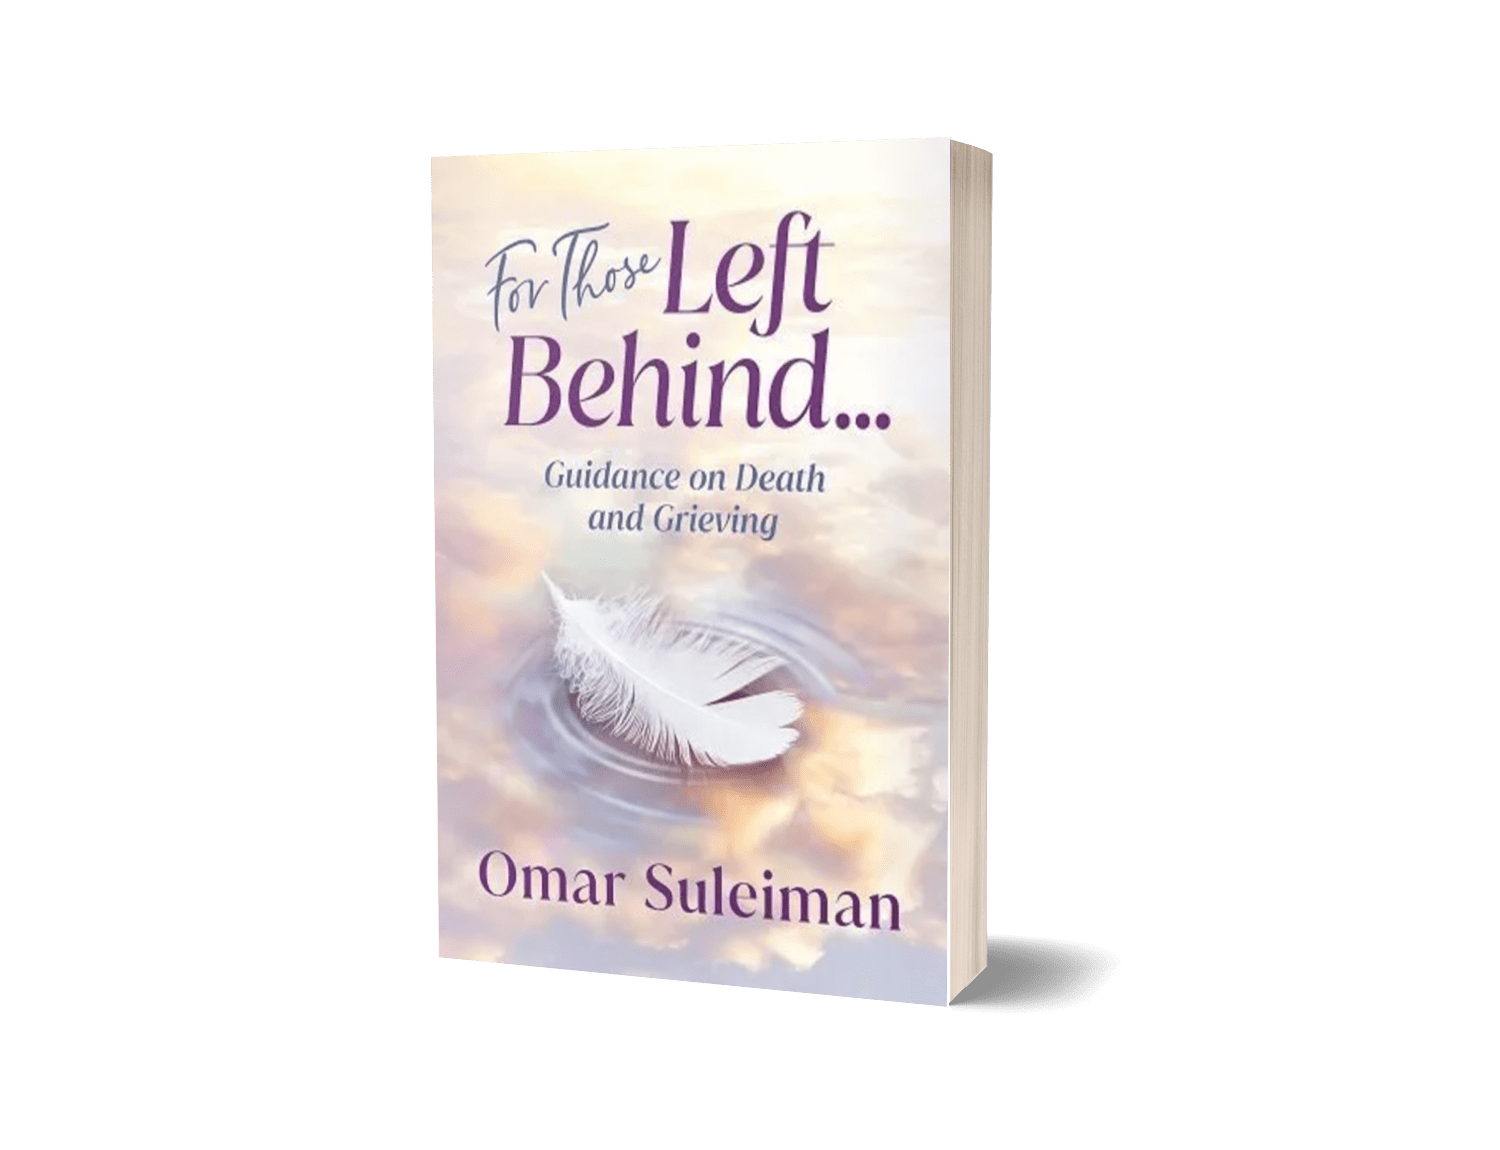 For those left behind by Omar Suleiman